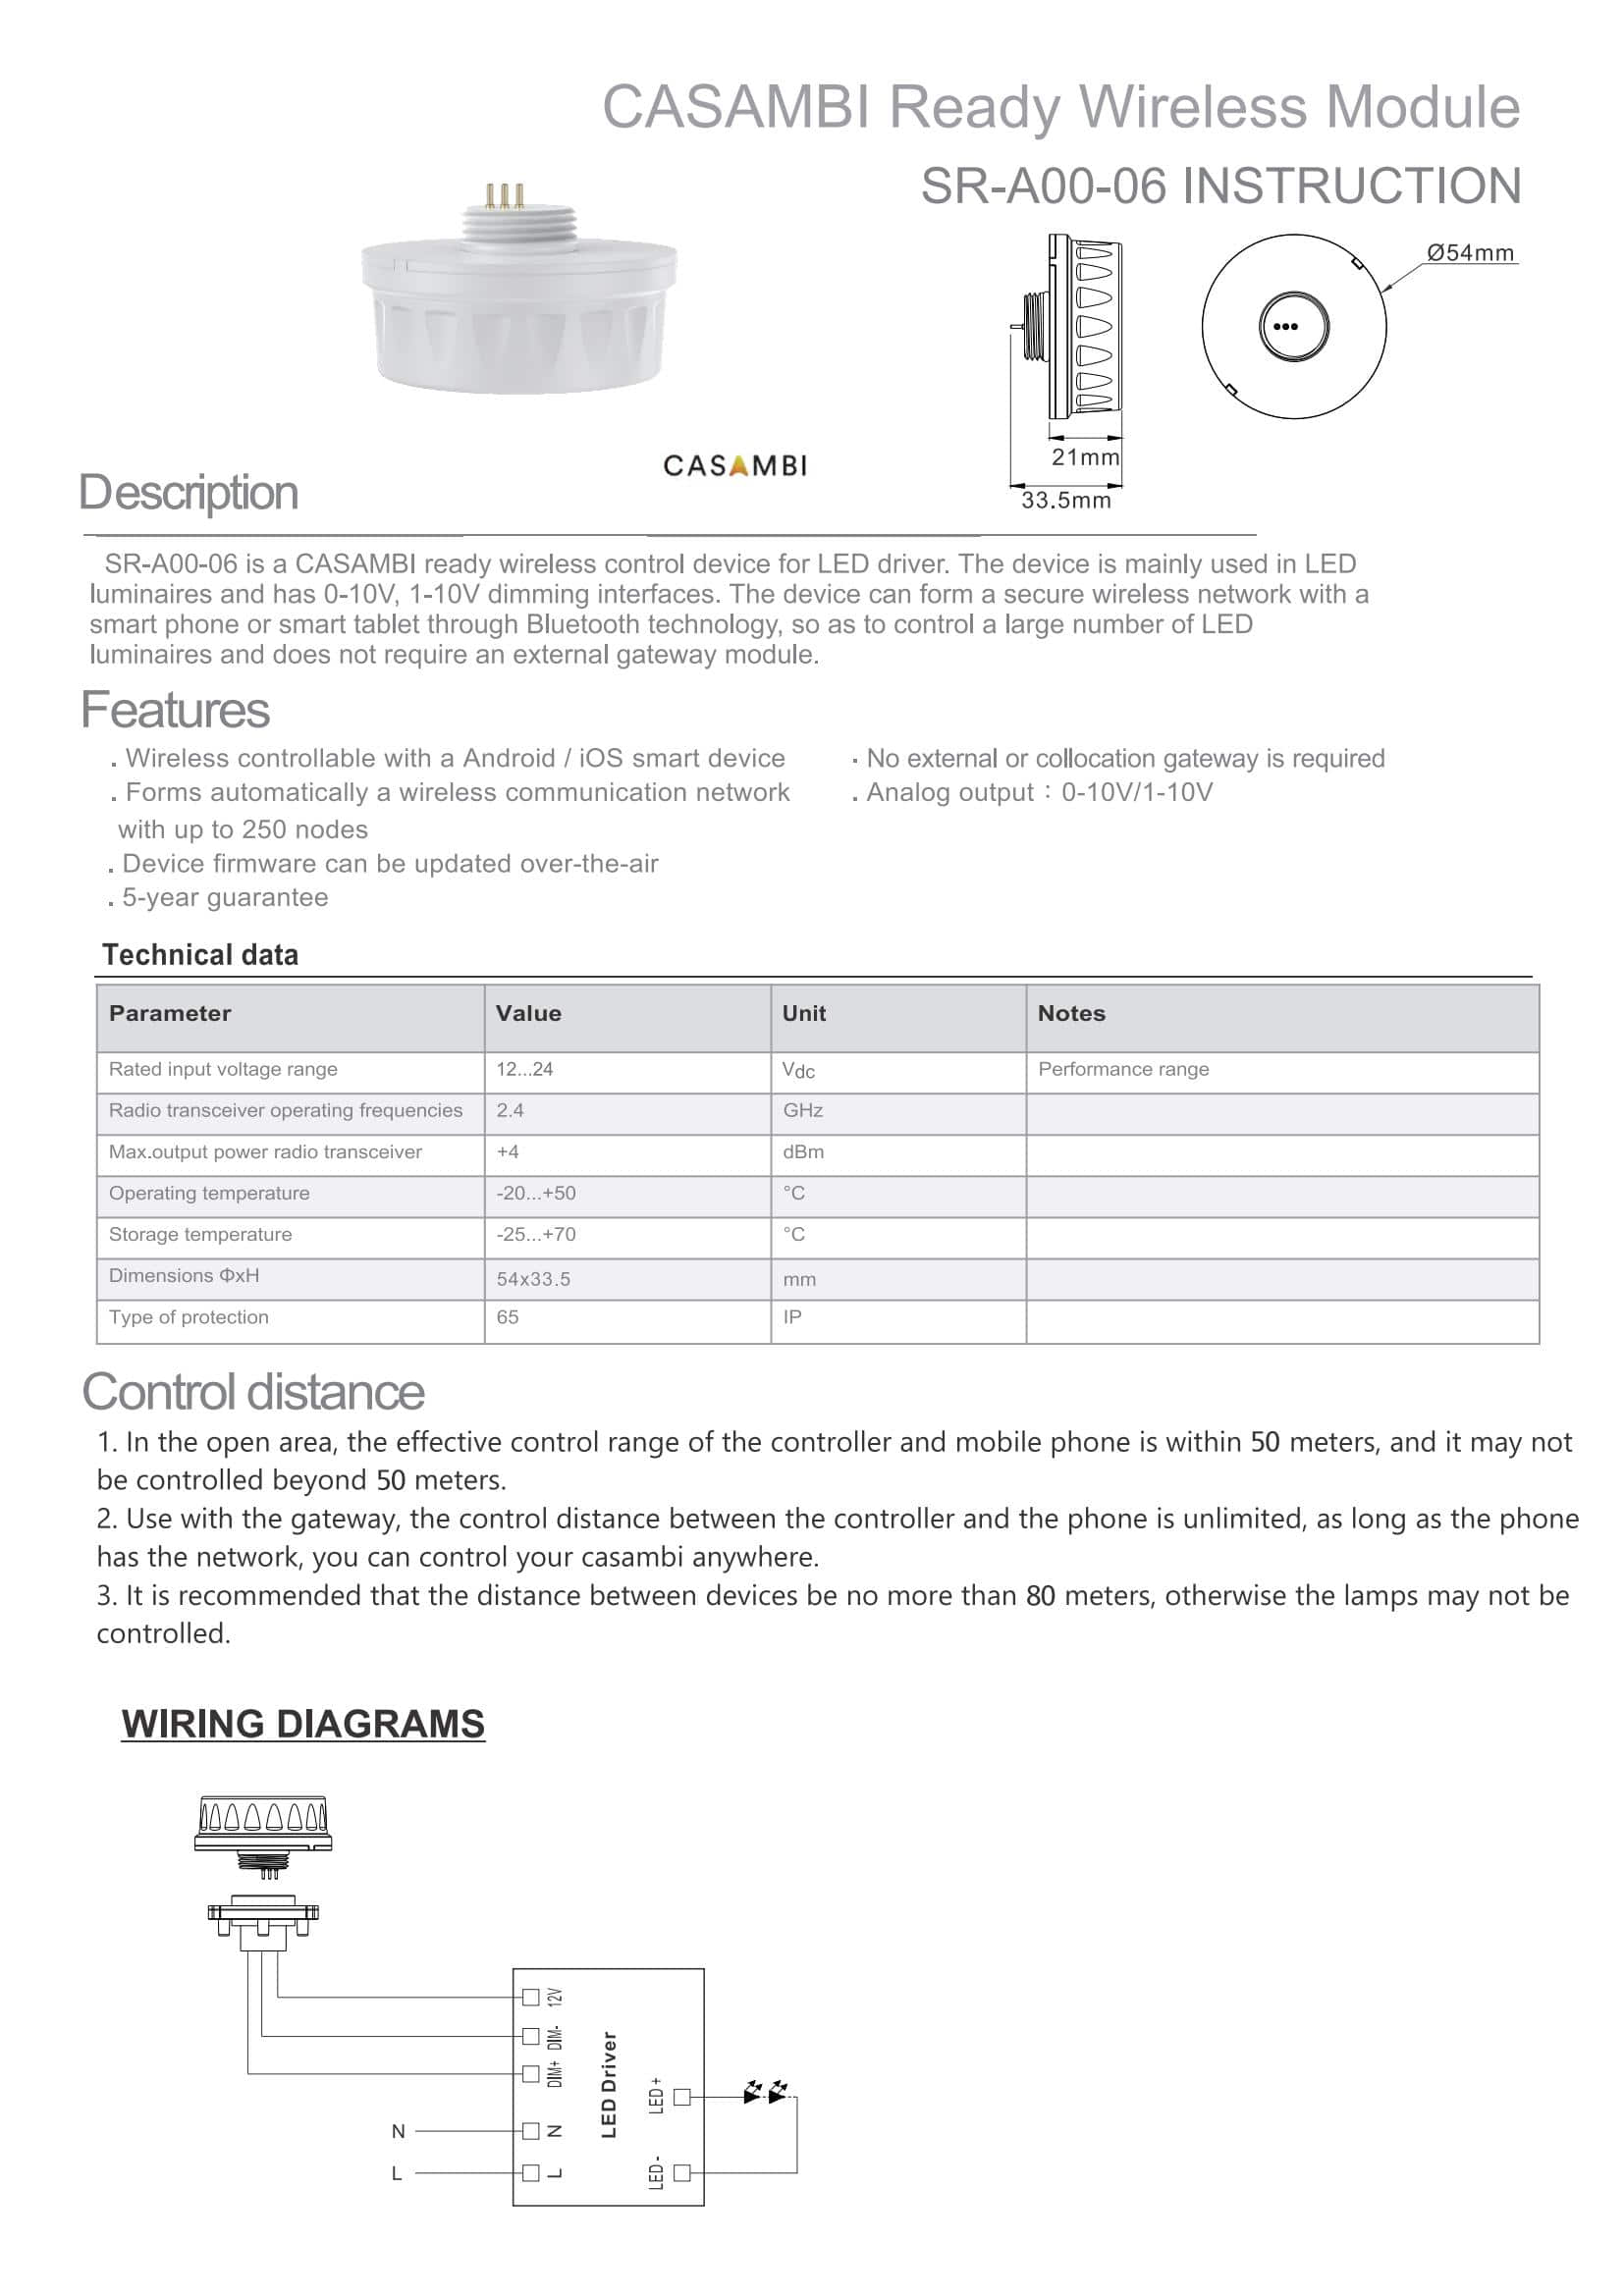 Casambi Ready Wireless Controller for 3 Pin Twist M20 Receptacle